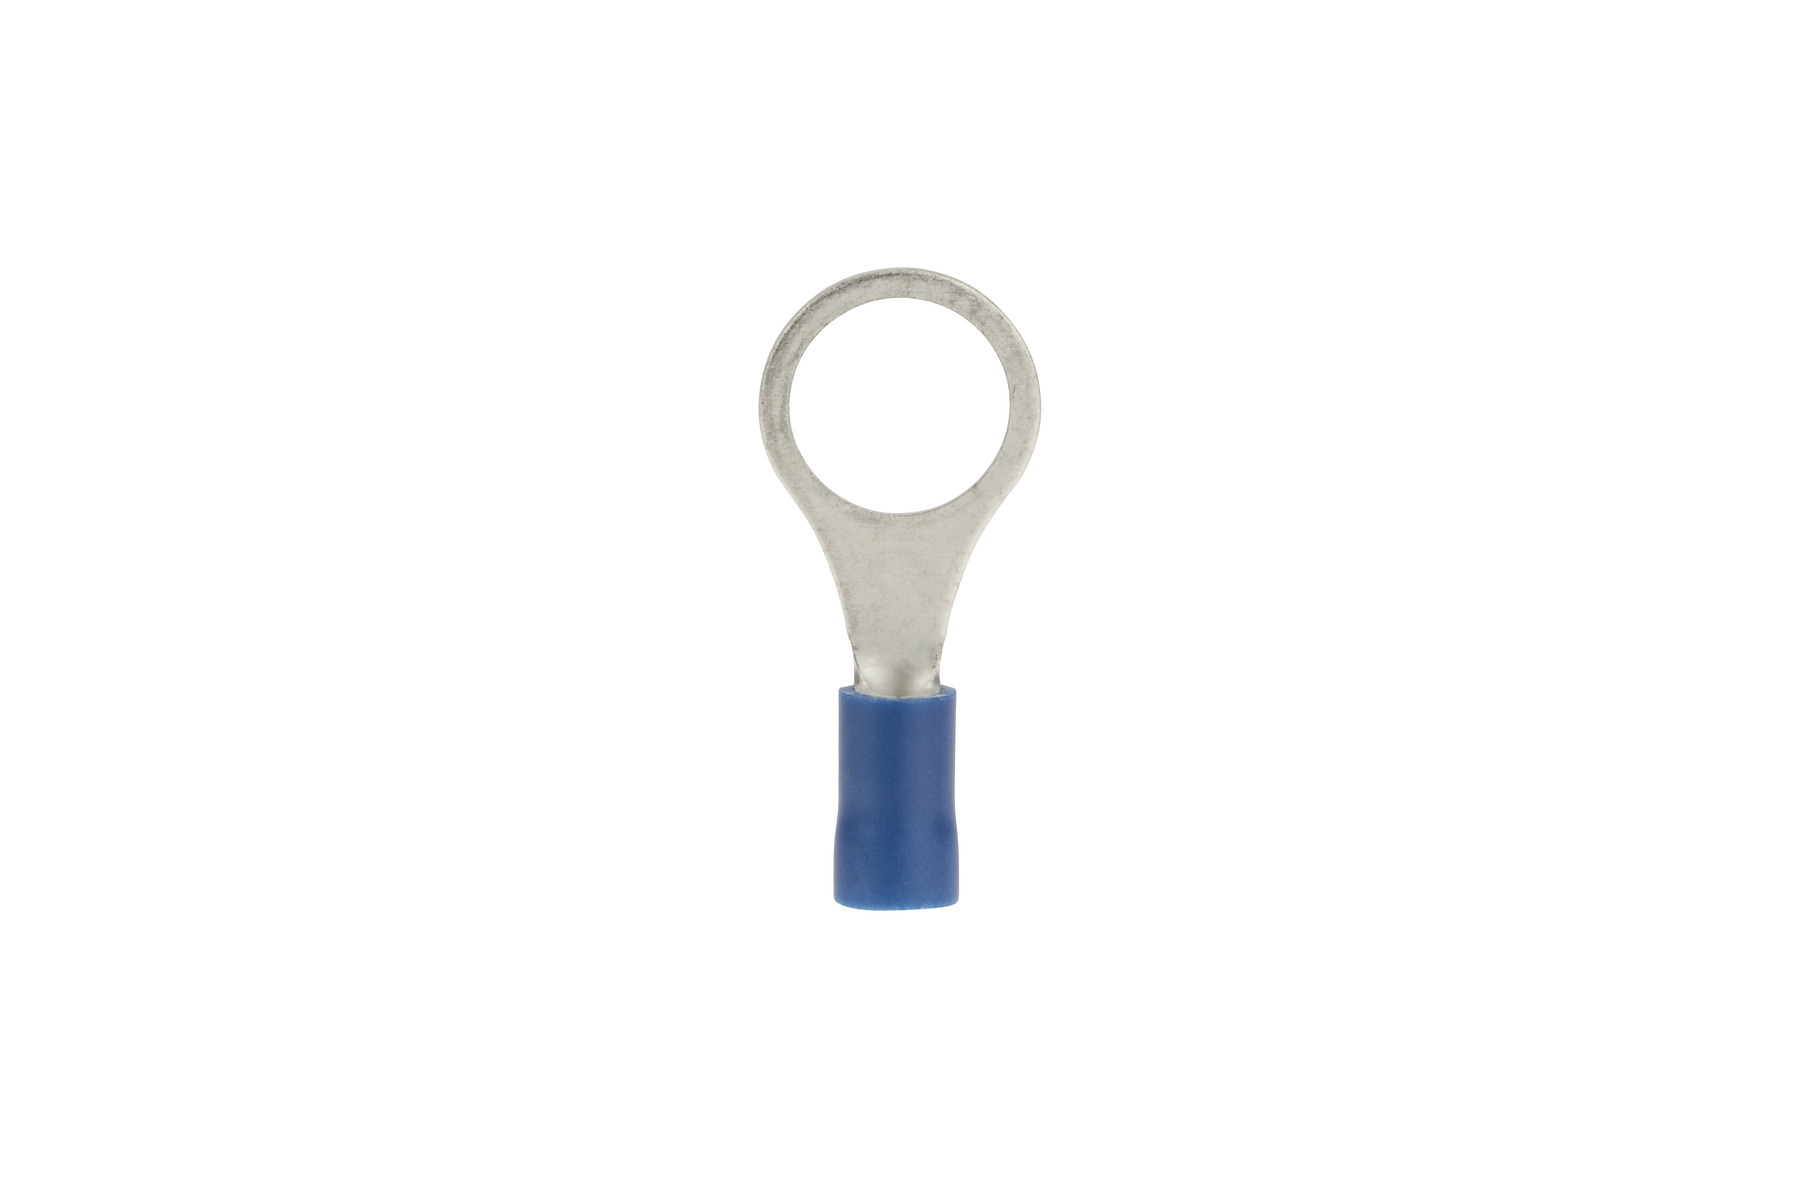 Install Bay Vinyl Terminal Ring Connector 16/14 Gauge 3/8 Inch, Blue -  BVRT38, 100 Pack